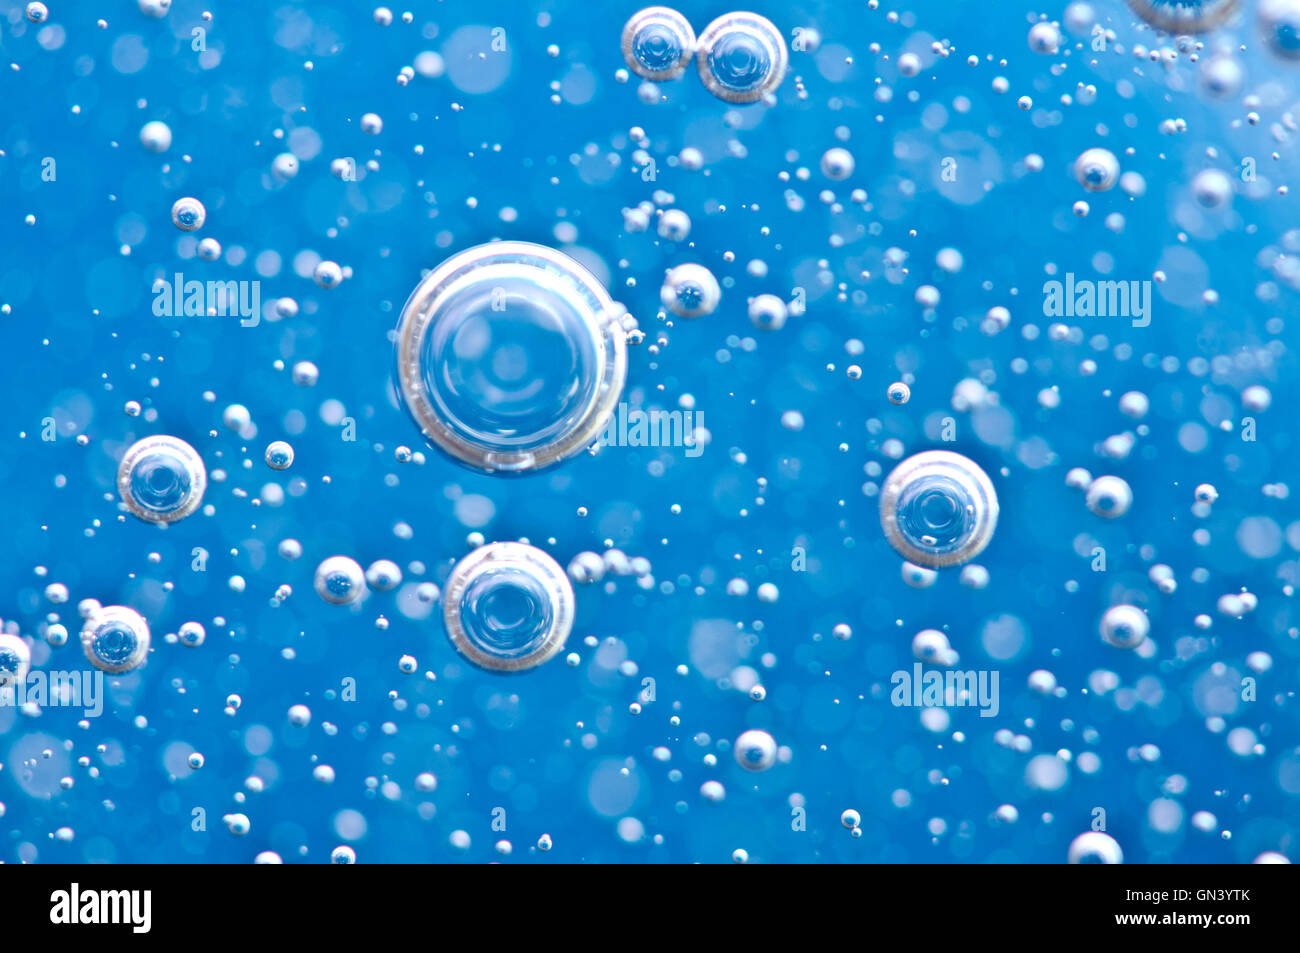 Macro Oxygen bubbles in blue clear water, concept such as ecology, environment, clean sea, potable water Stock Photo